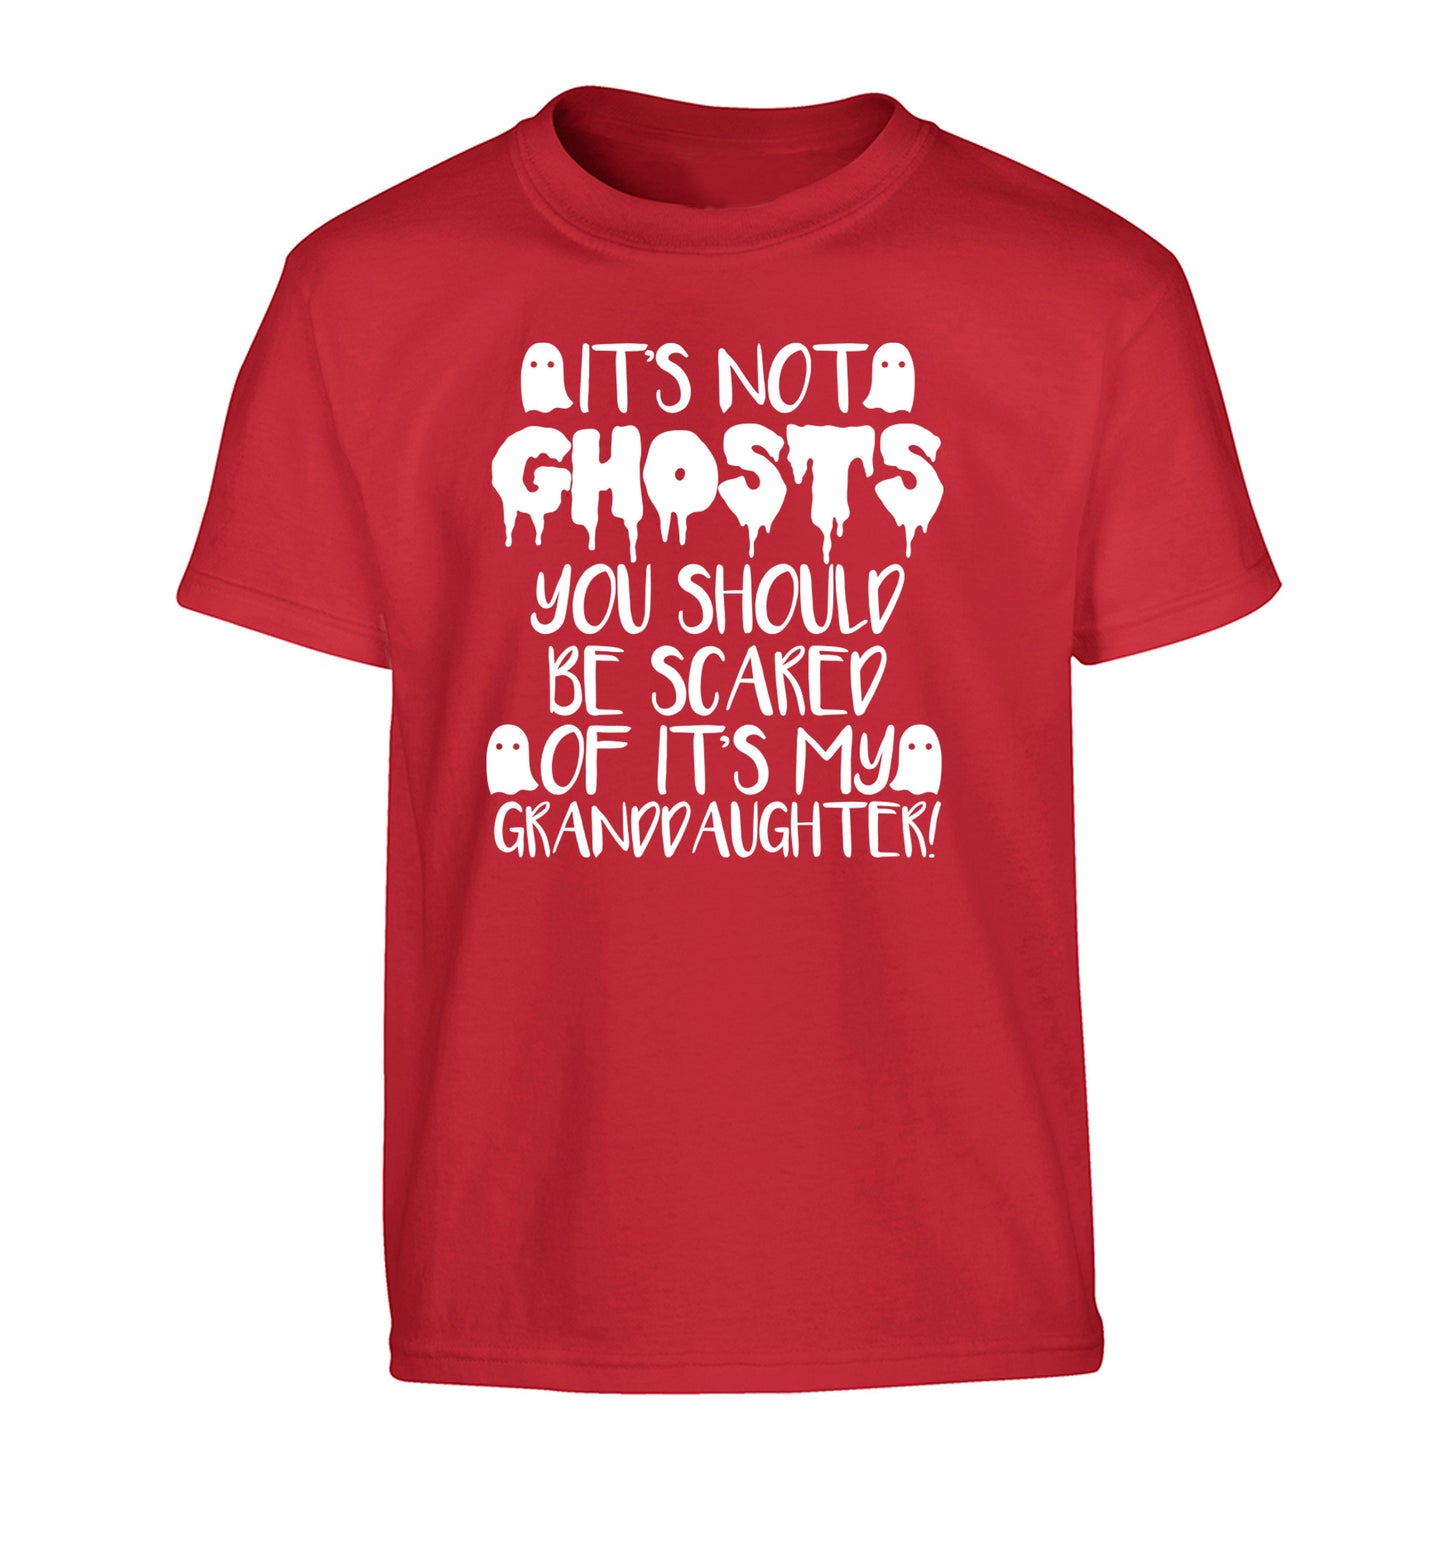 It's not ghosts you should be scared of it's my granddaughter! Children's red Tshirt 12-14 Years